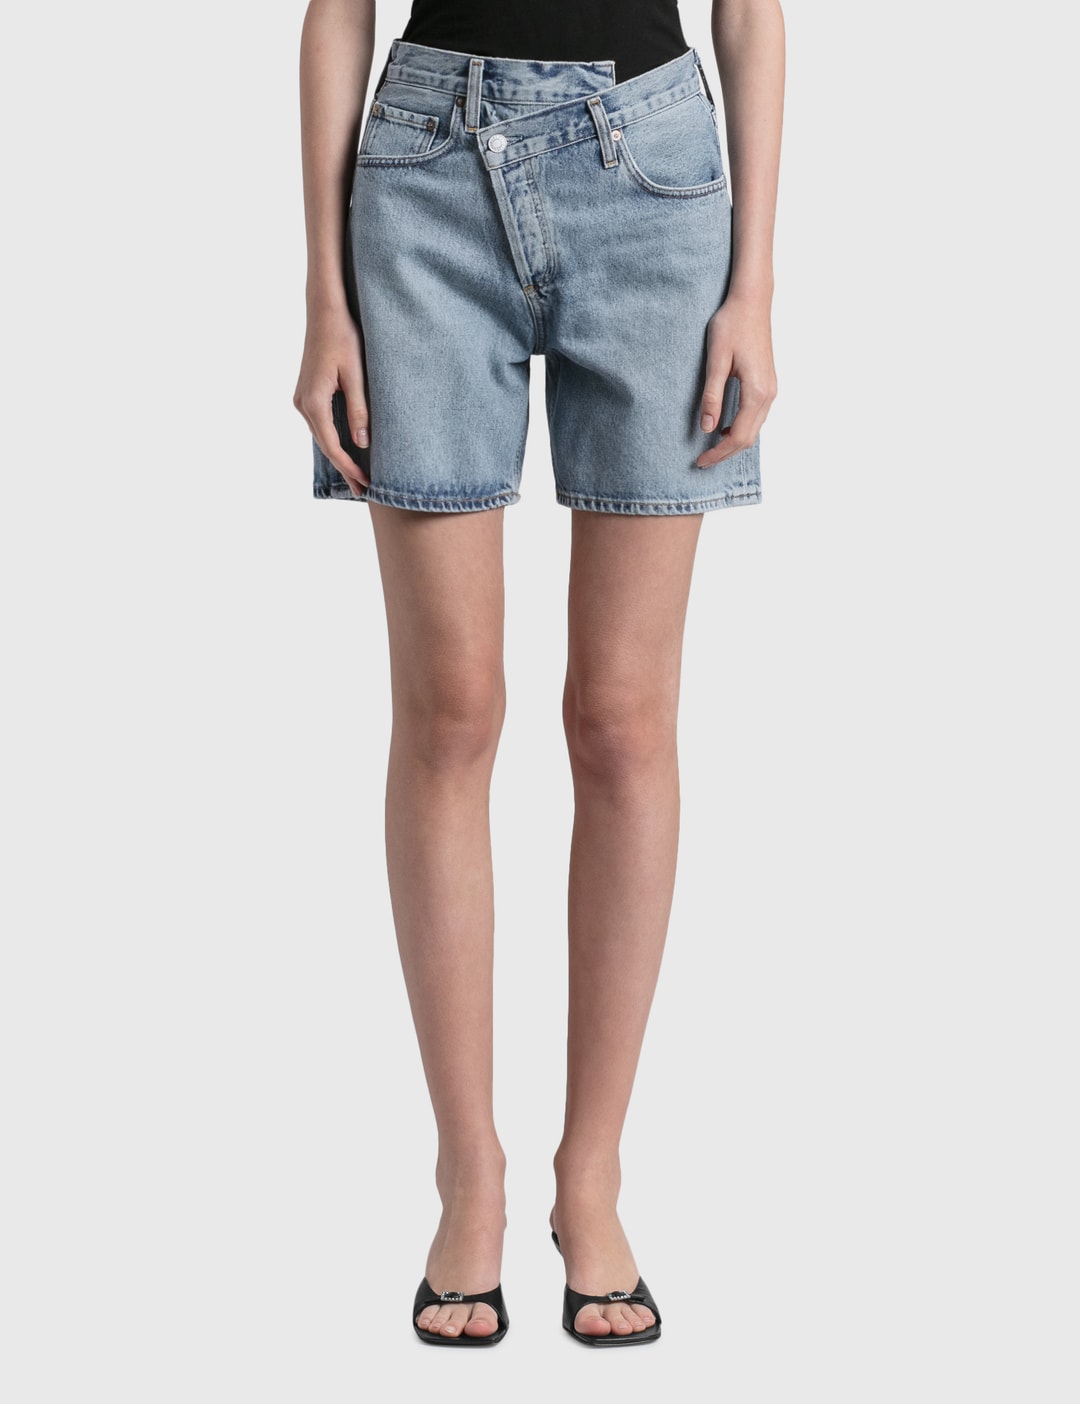 AGOLDE - Criss Cross Shorts | HBX - Globally Curated Fashion and ...